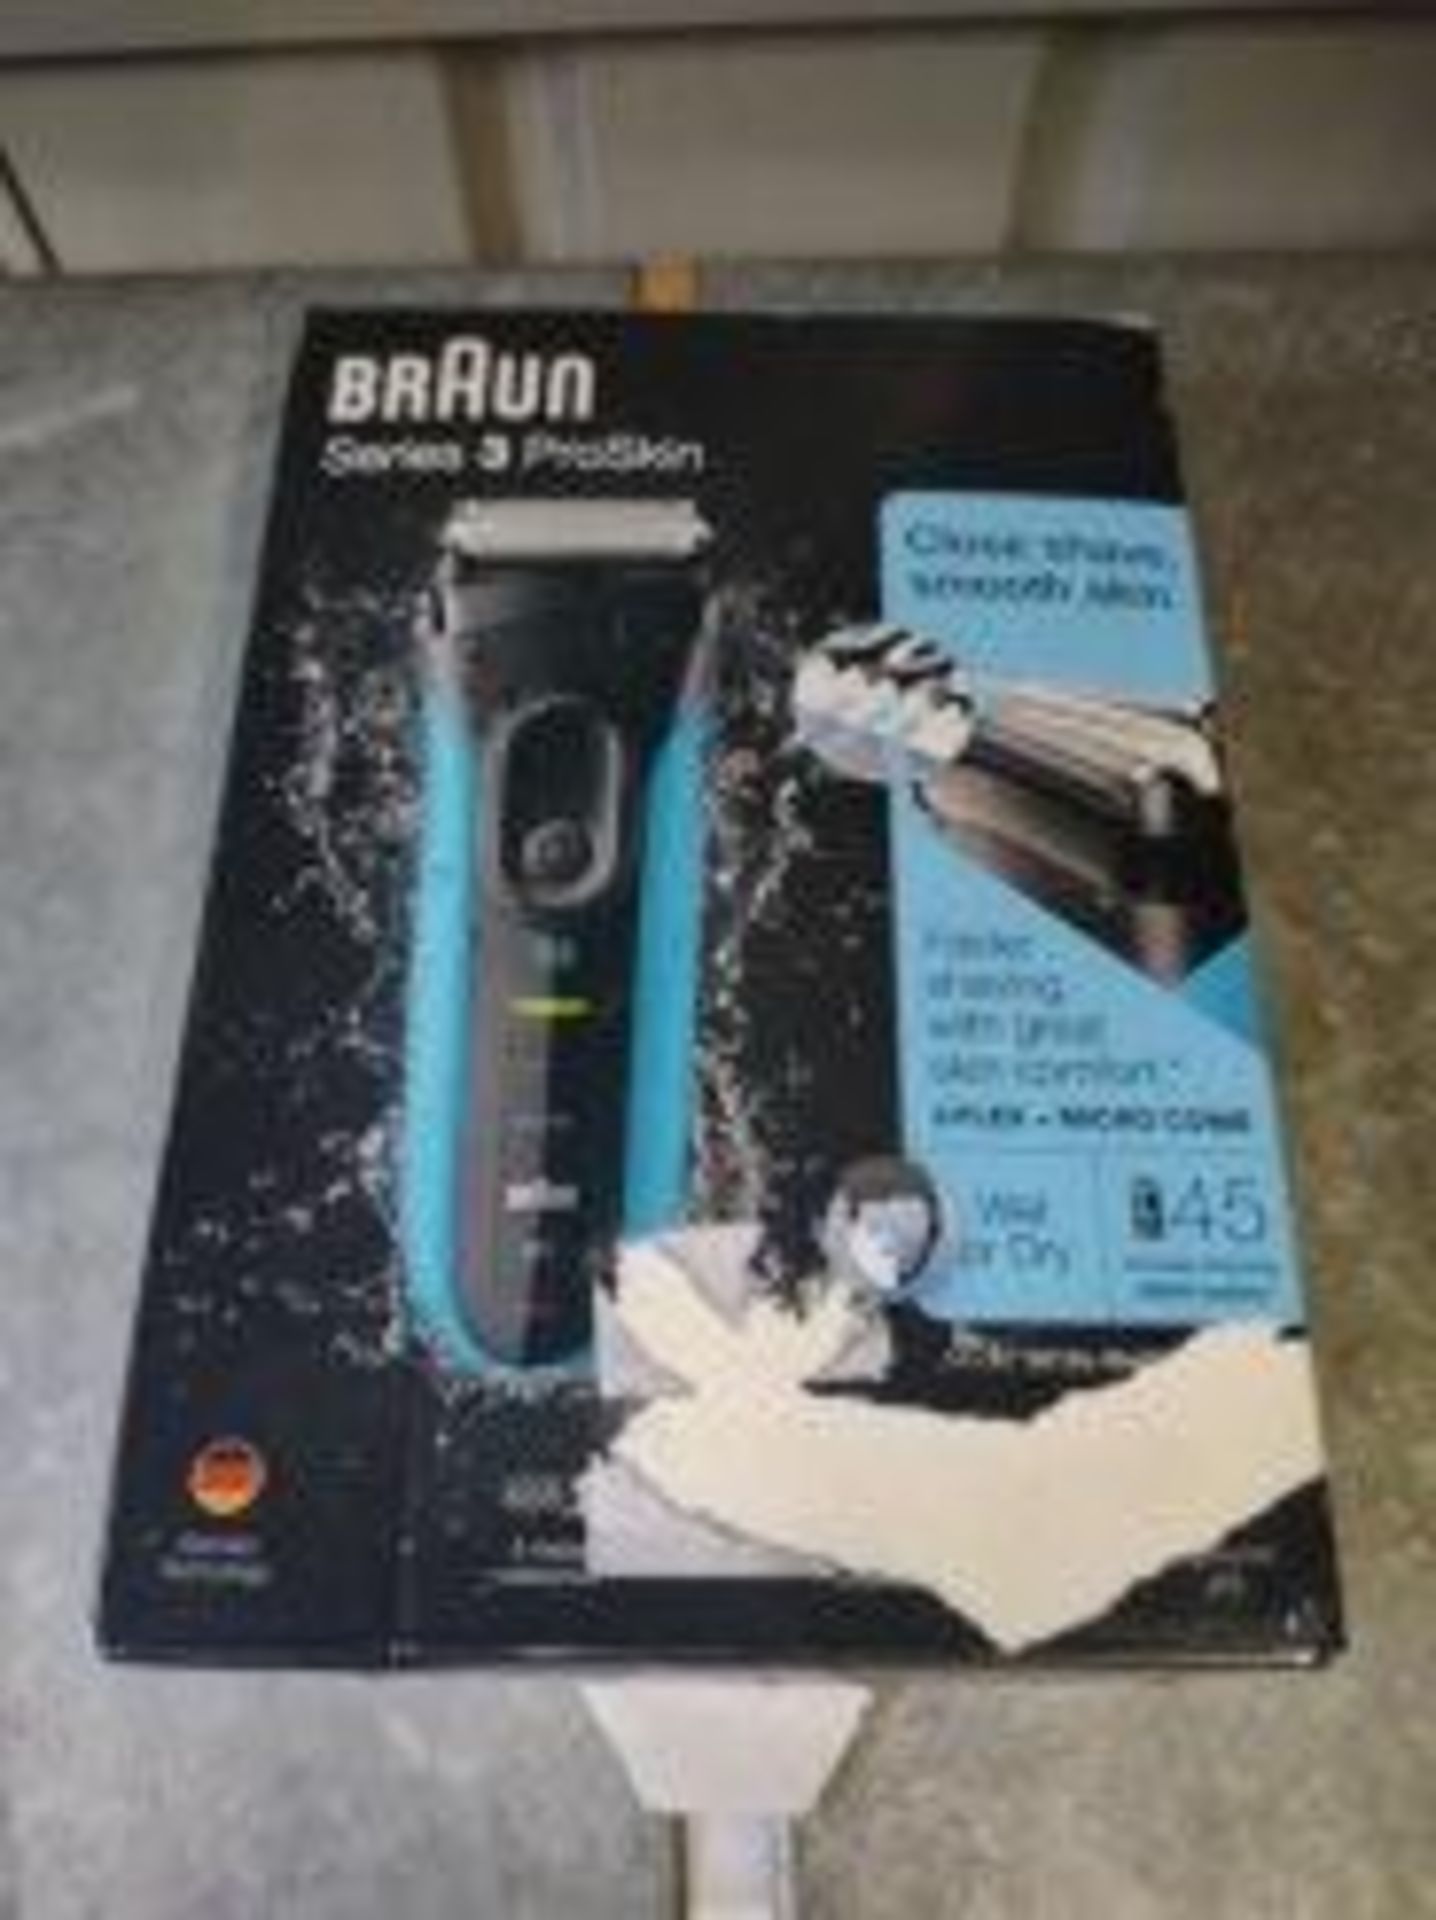 Braun series 3 pro skin shaver – Approx rrp £69.99